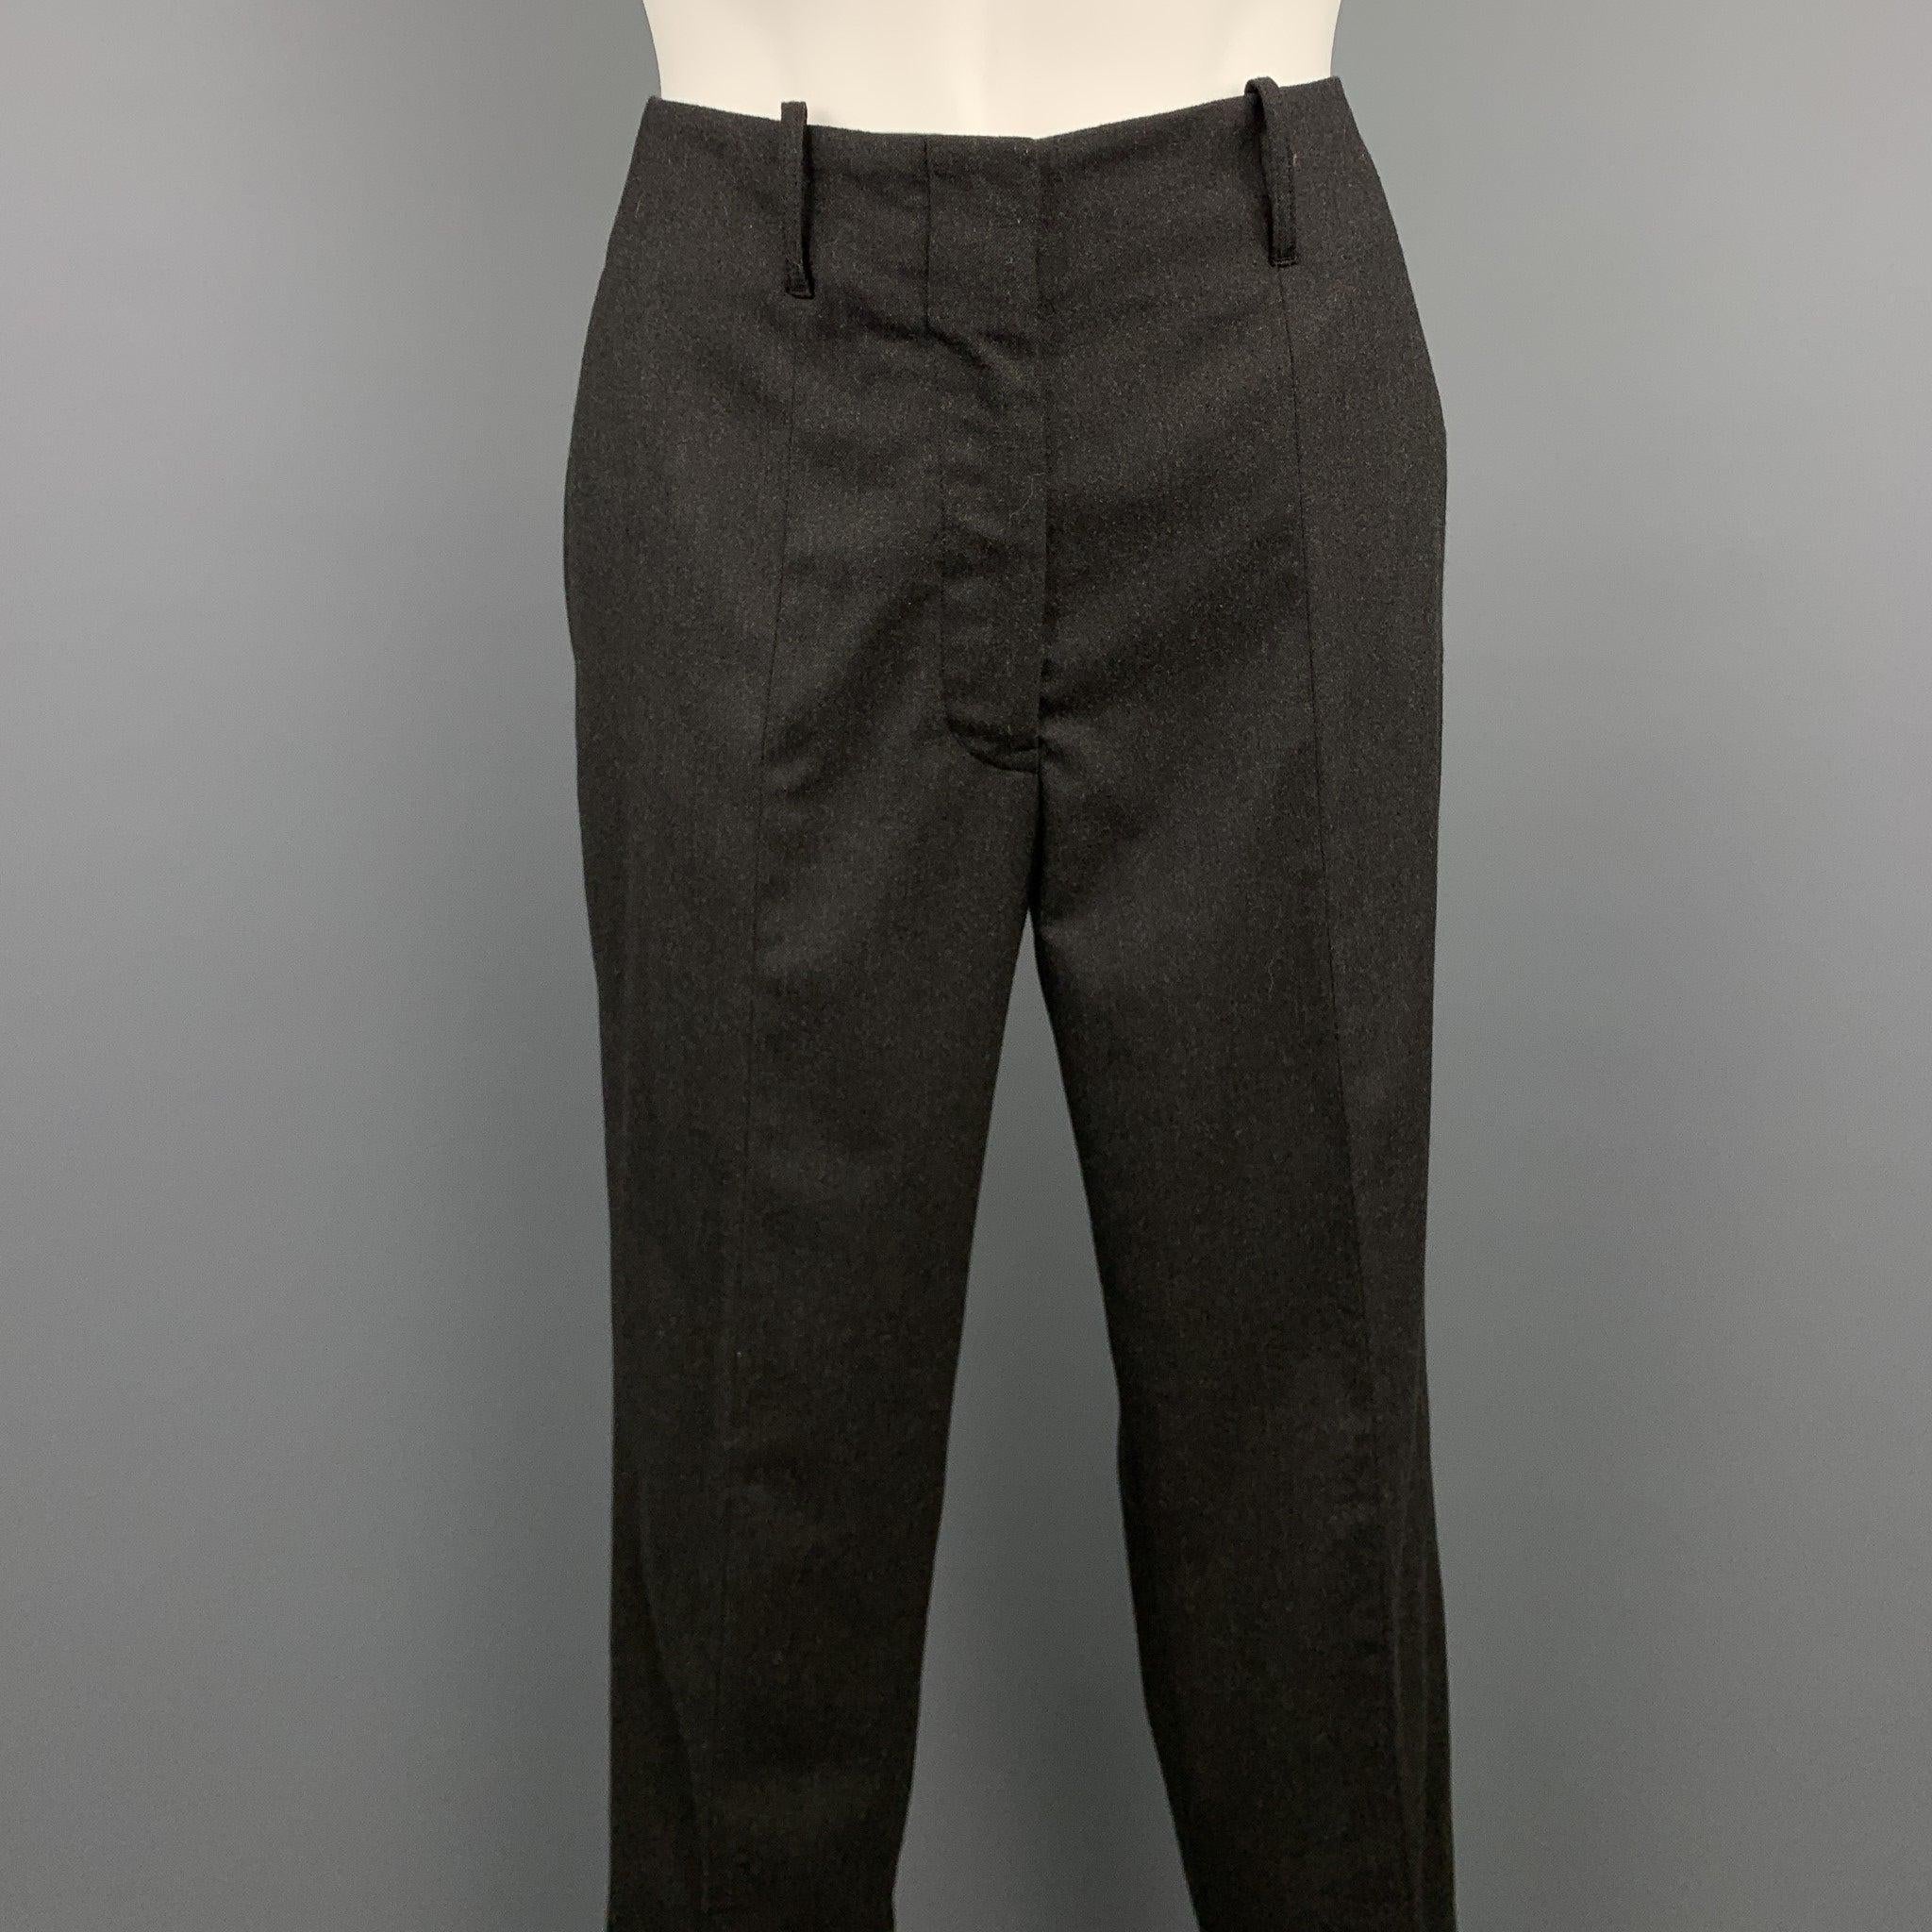 JIL SANDER dress pants comes in a charcoal virgin wool featuring a straight leg, front tab, and a zip fly closure. Made in Italy.
Excellent
Pre-Owned Condition. 

Marked:  IT 32 

Measurements: 
 Waist: 28 inches 
Rise: 8.5 inches 
Inseam: 29 inches